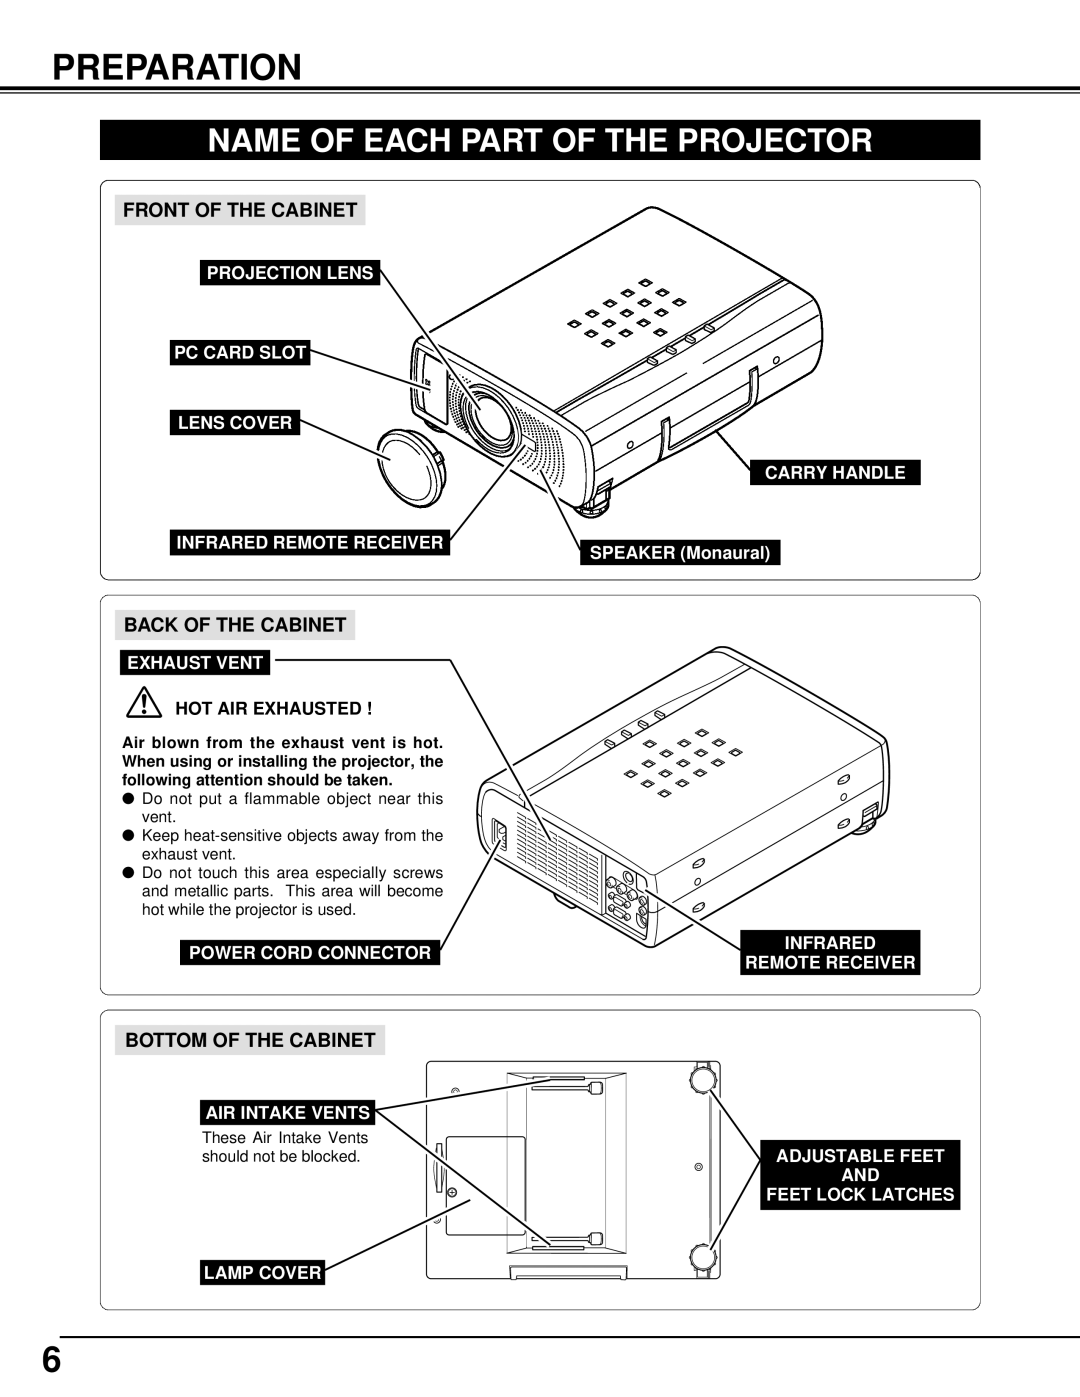 BOXLIGHT CP-33t Preparation, Name Of Each Part Of The Projector, Front Of The Cabinet, Back Of The Cabinet, Exhaust Vent 